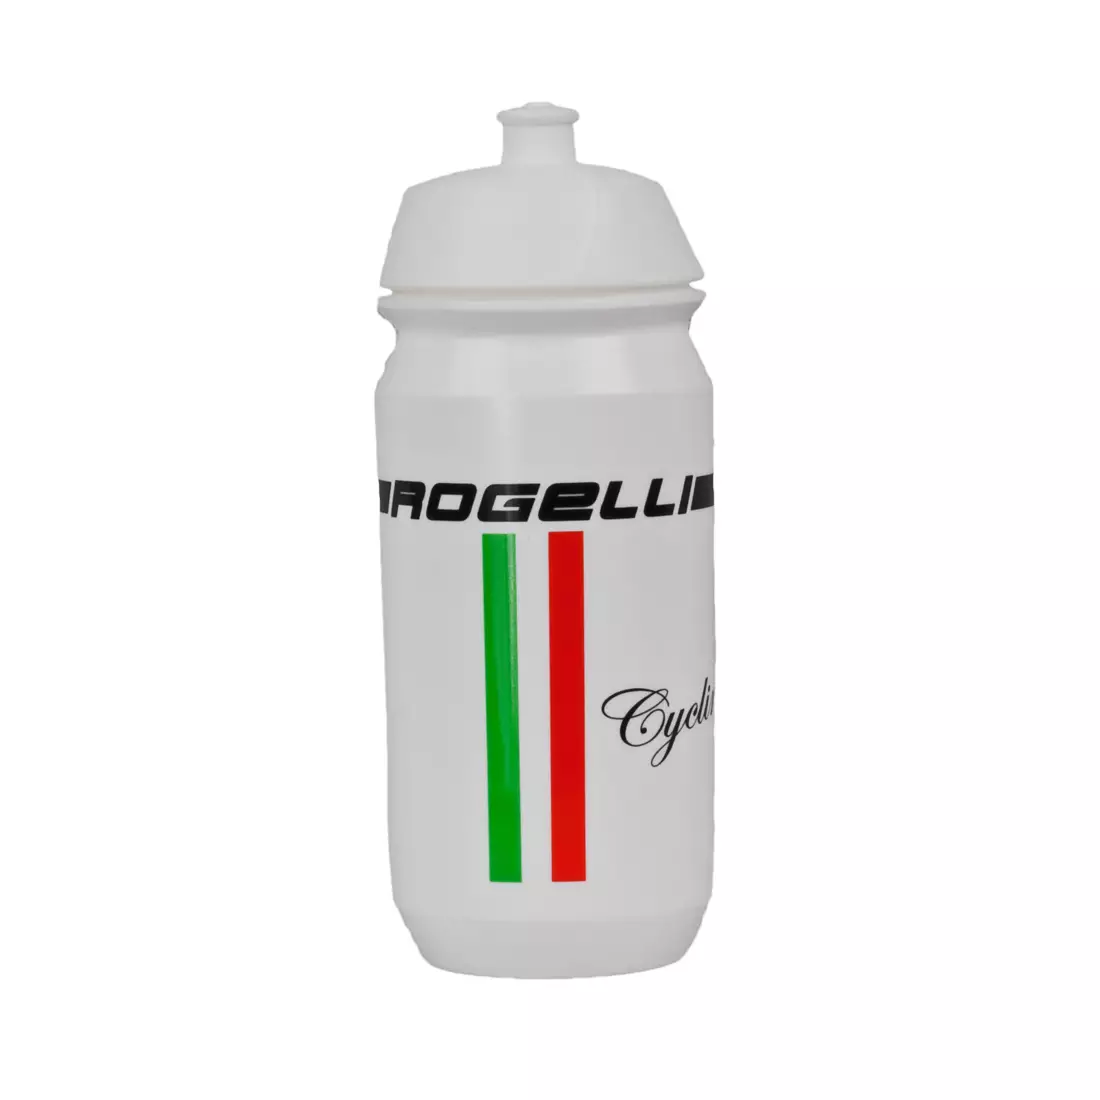 ROGELLI ss18 BIKE - TEAM - bicycle water bottle, color: White